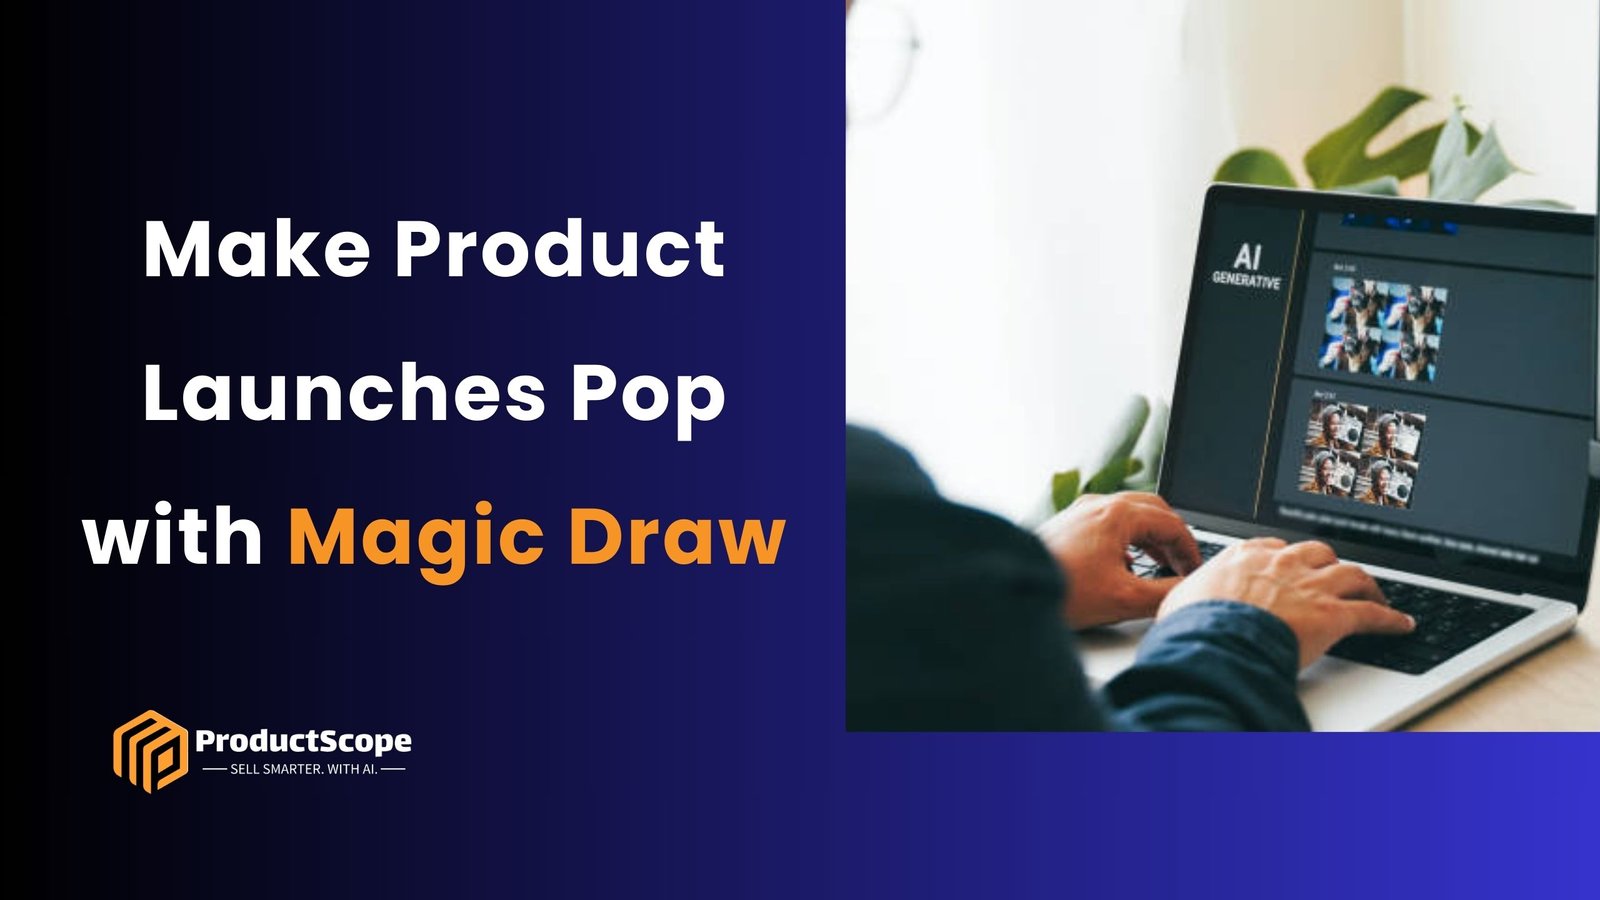 Make Product Launches Pop with Magic Draw